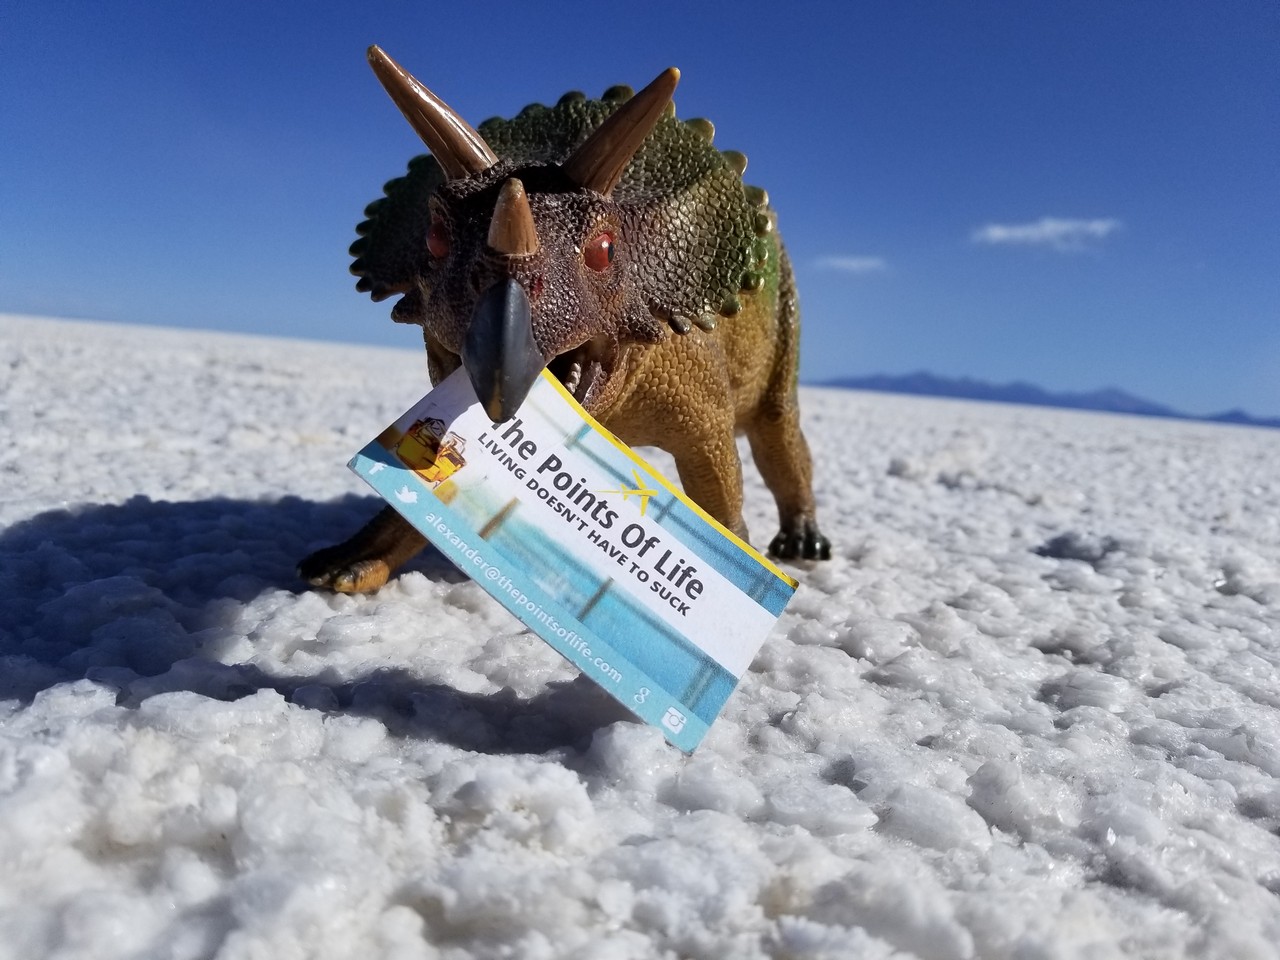 a toy dinosaur with a card in its mouth